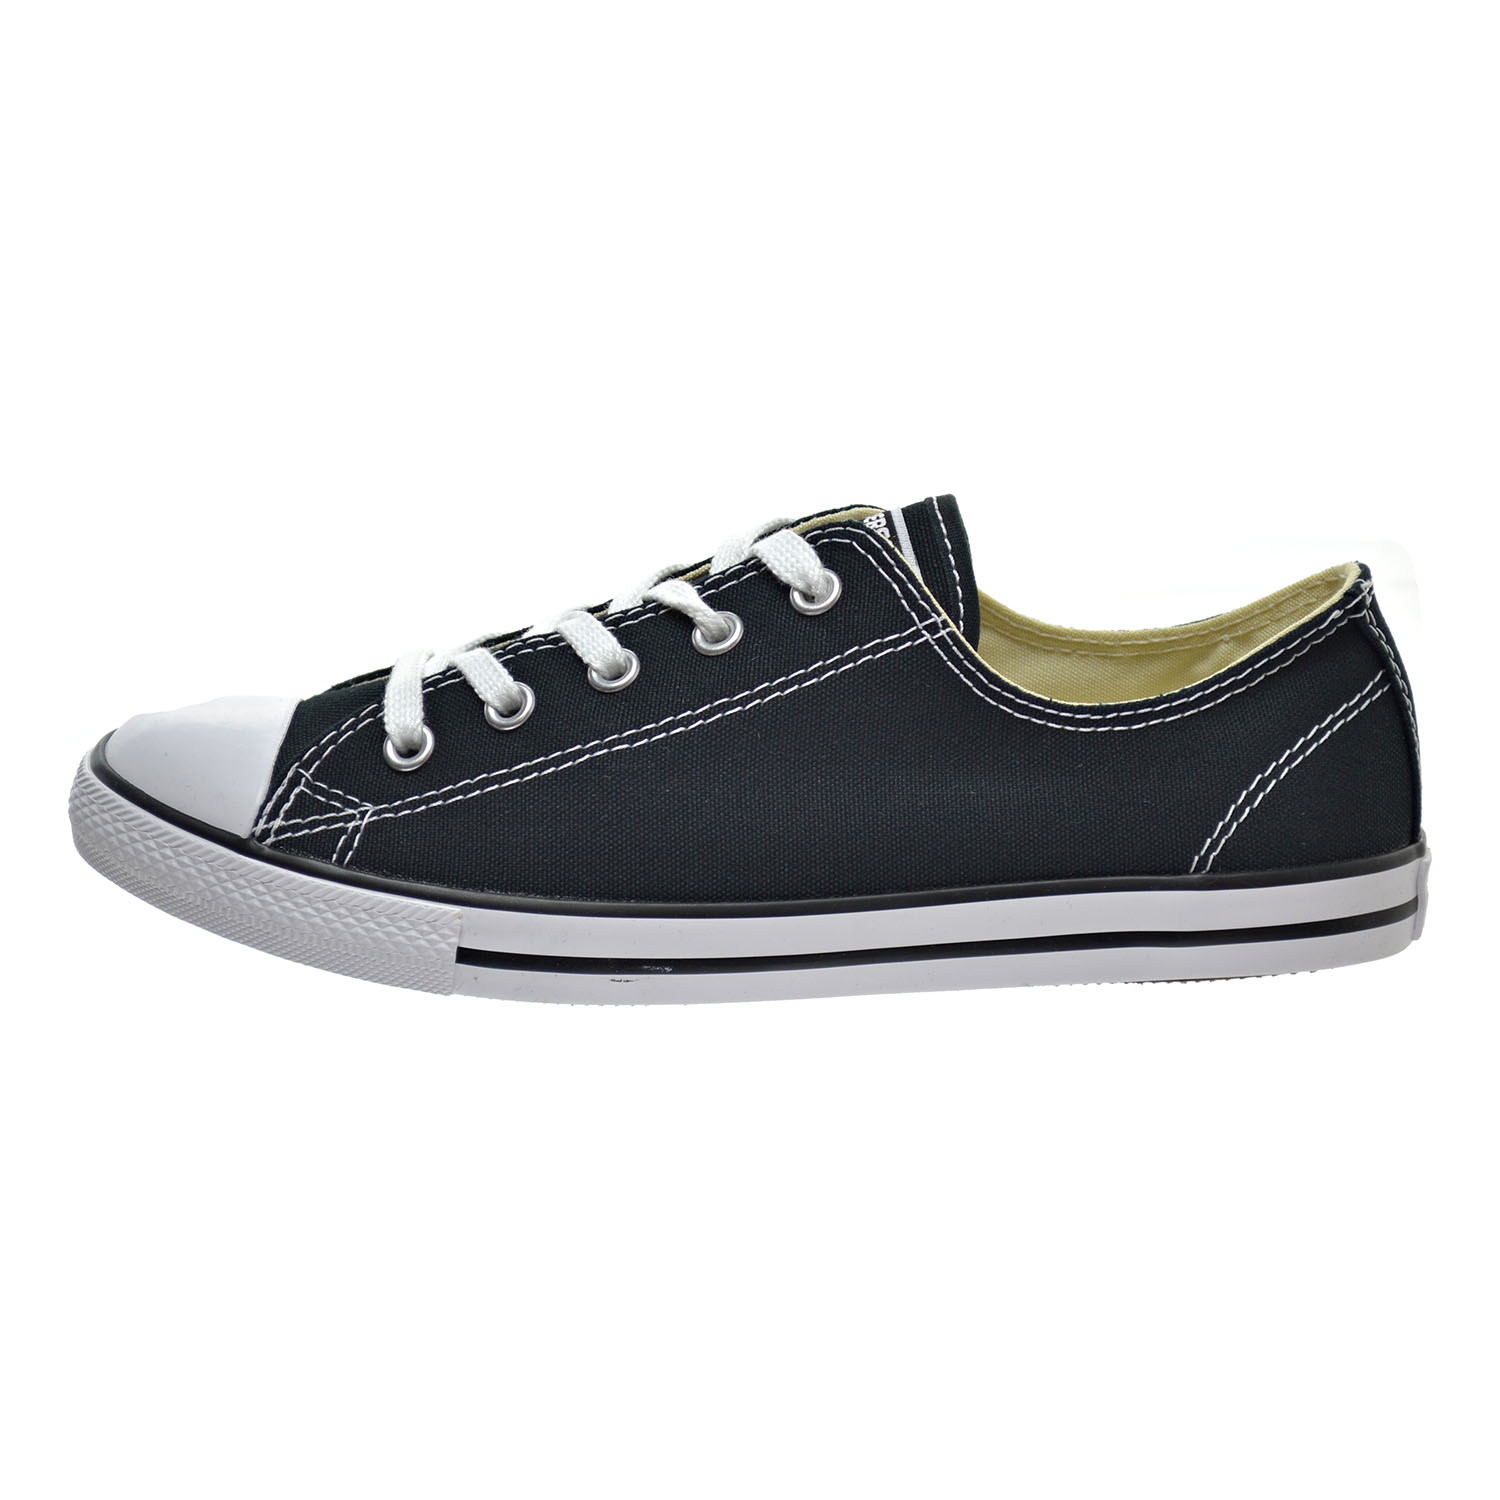 Converse Chuck Taylor All Star Dainty Low Top Womens Shoes Black ...